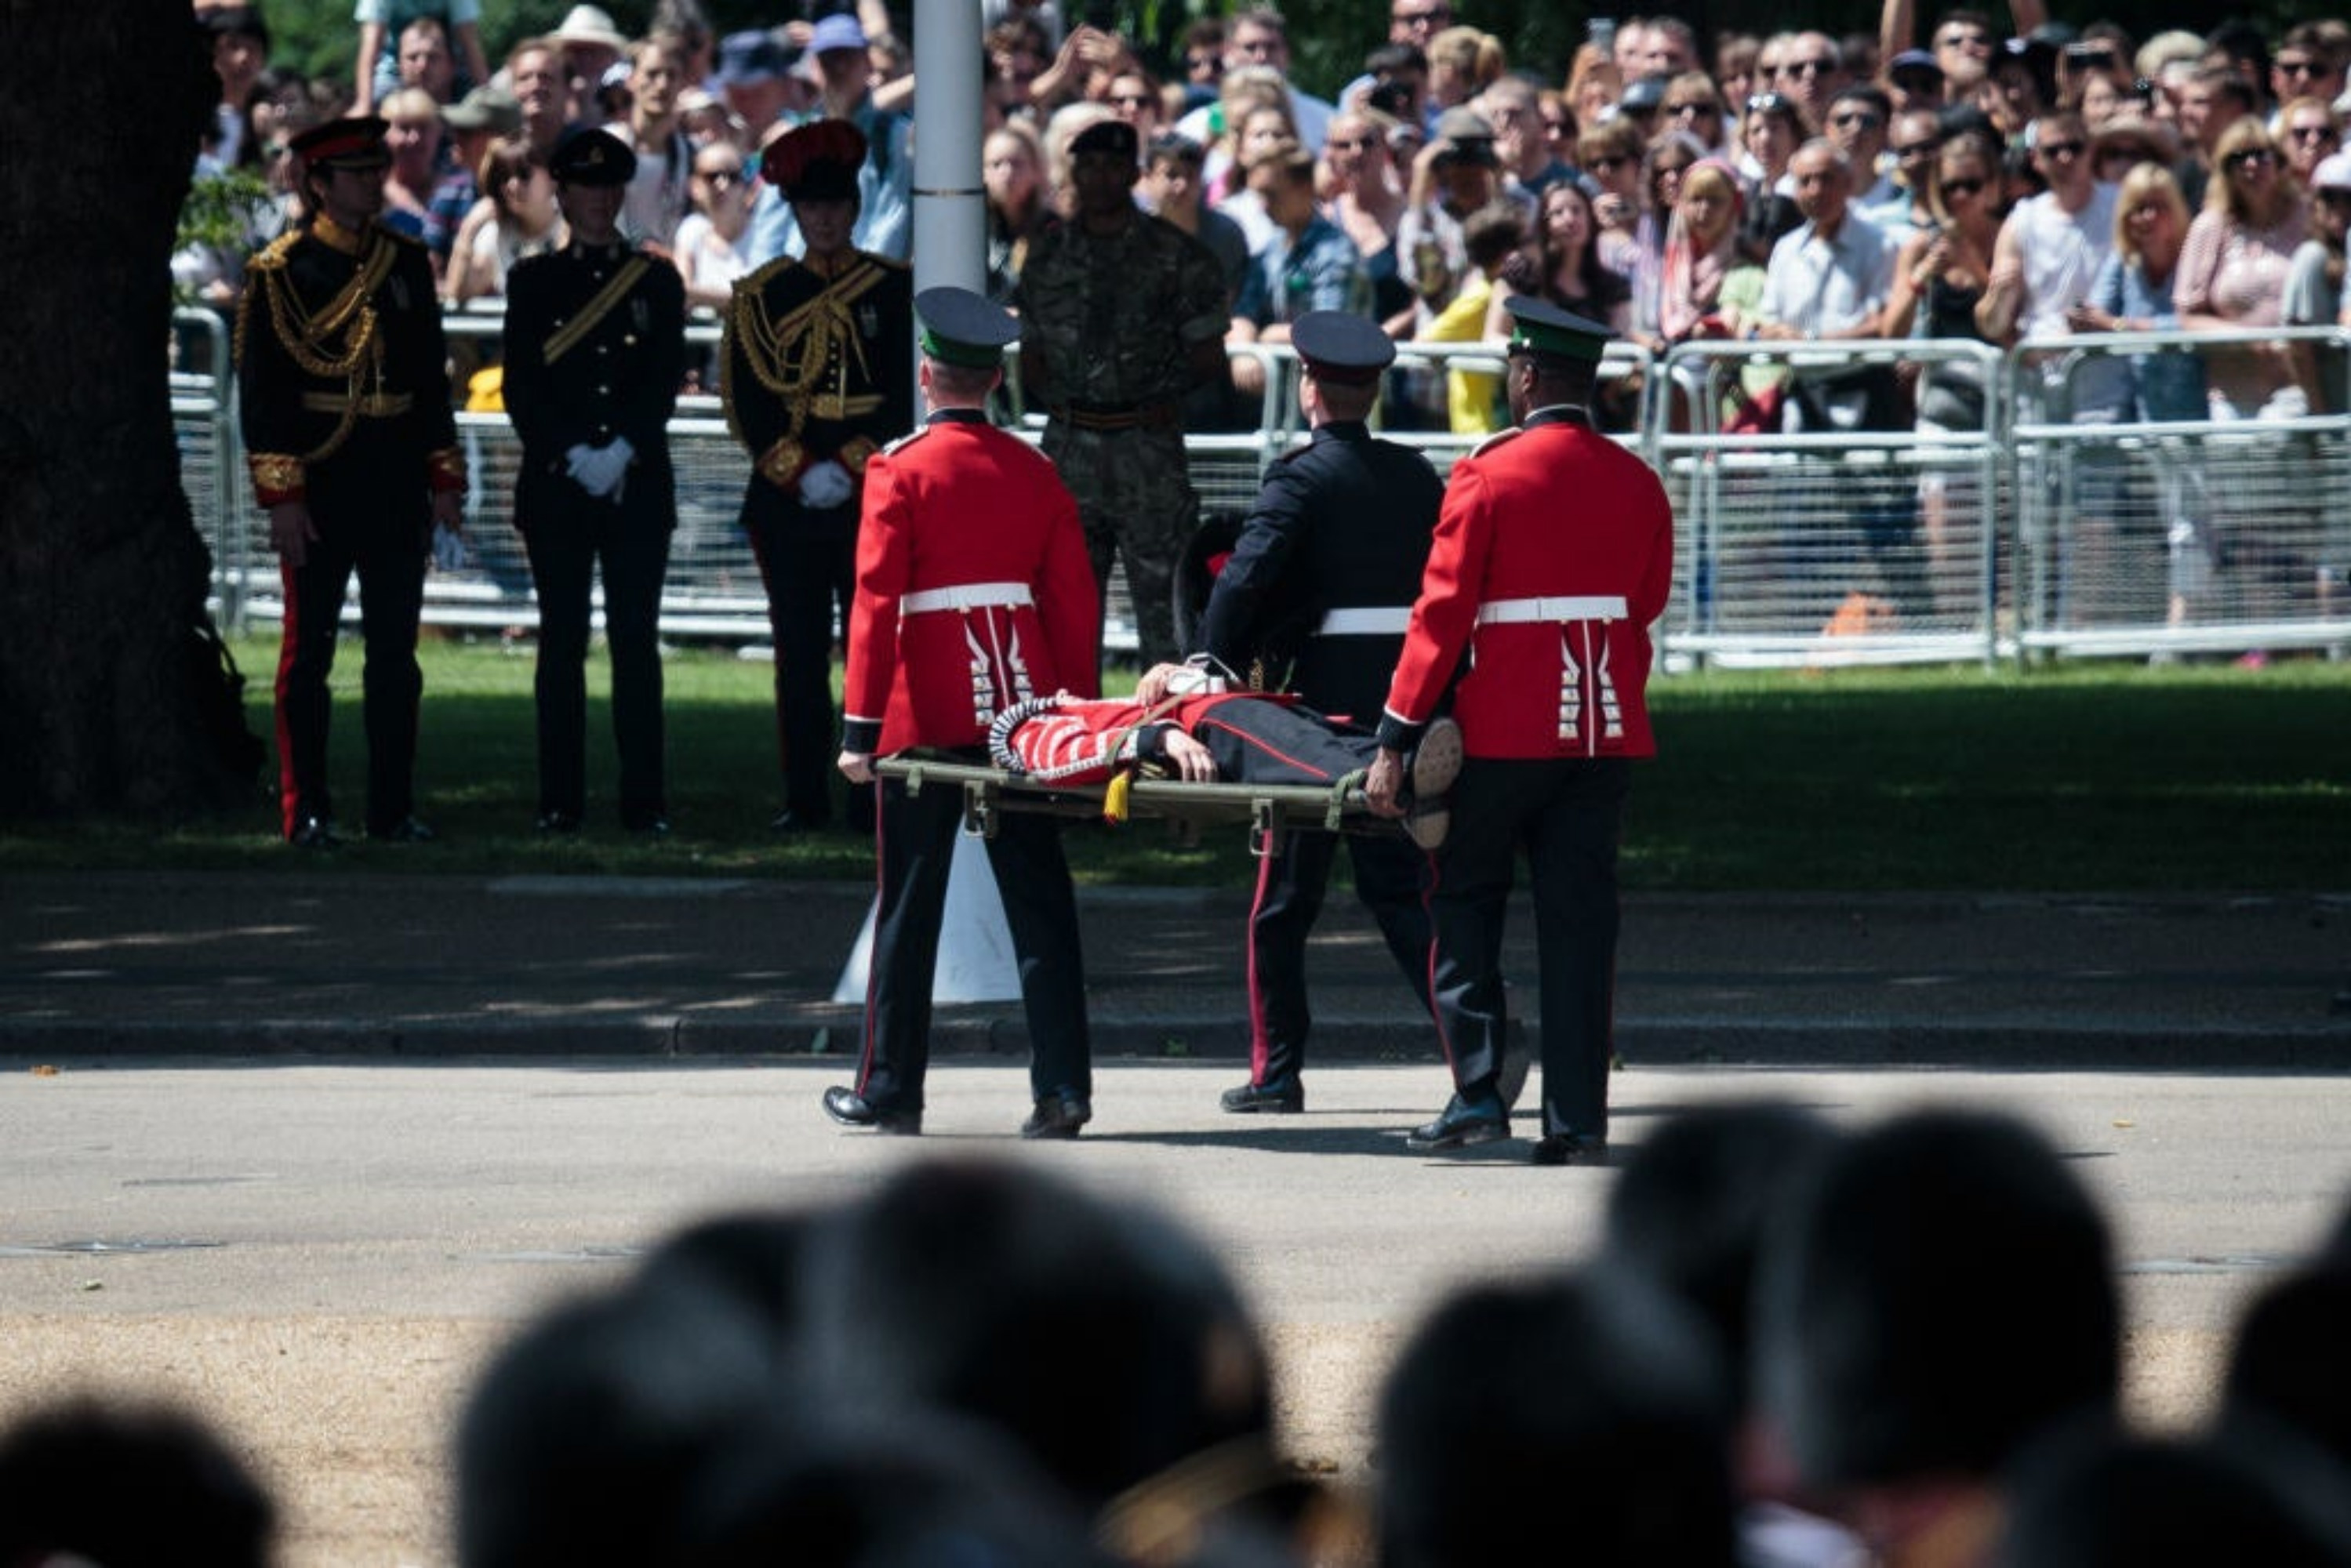 A member of the Coldstream Guards being taken away on a stretcher